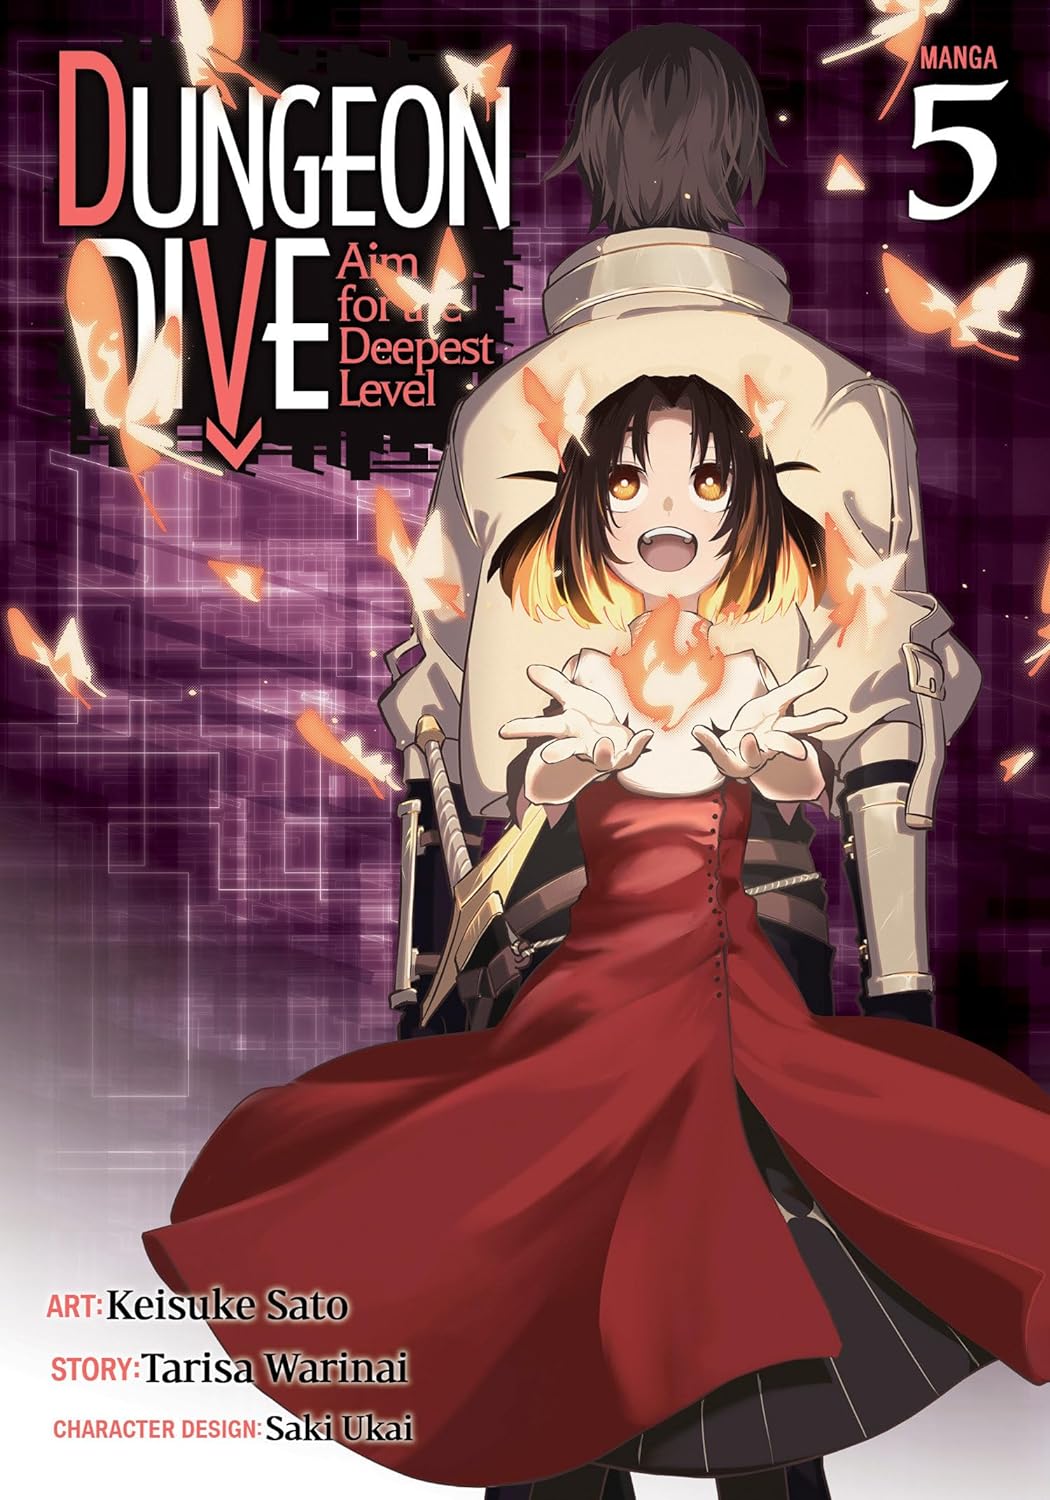 Dungeon Dive: Aim for the Deepest Level (Manga) Vol. 05